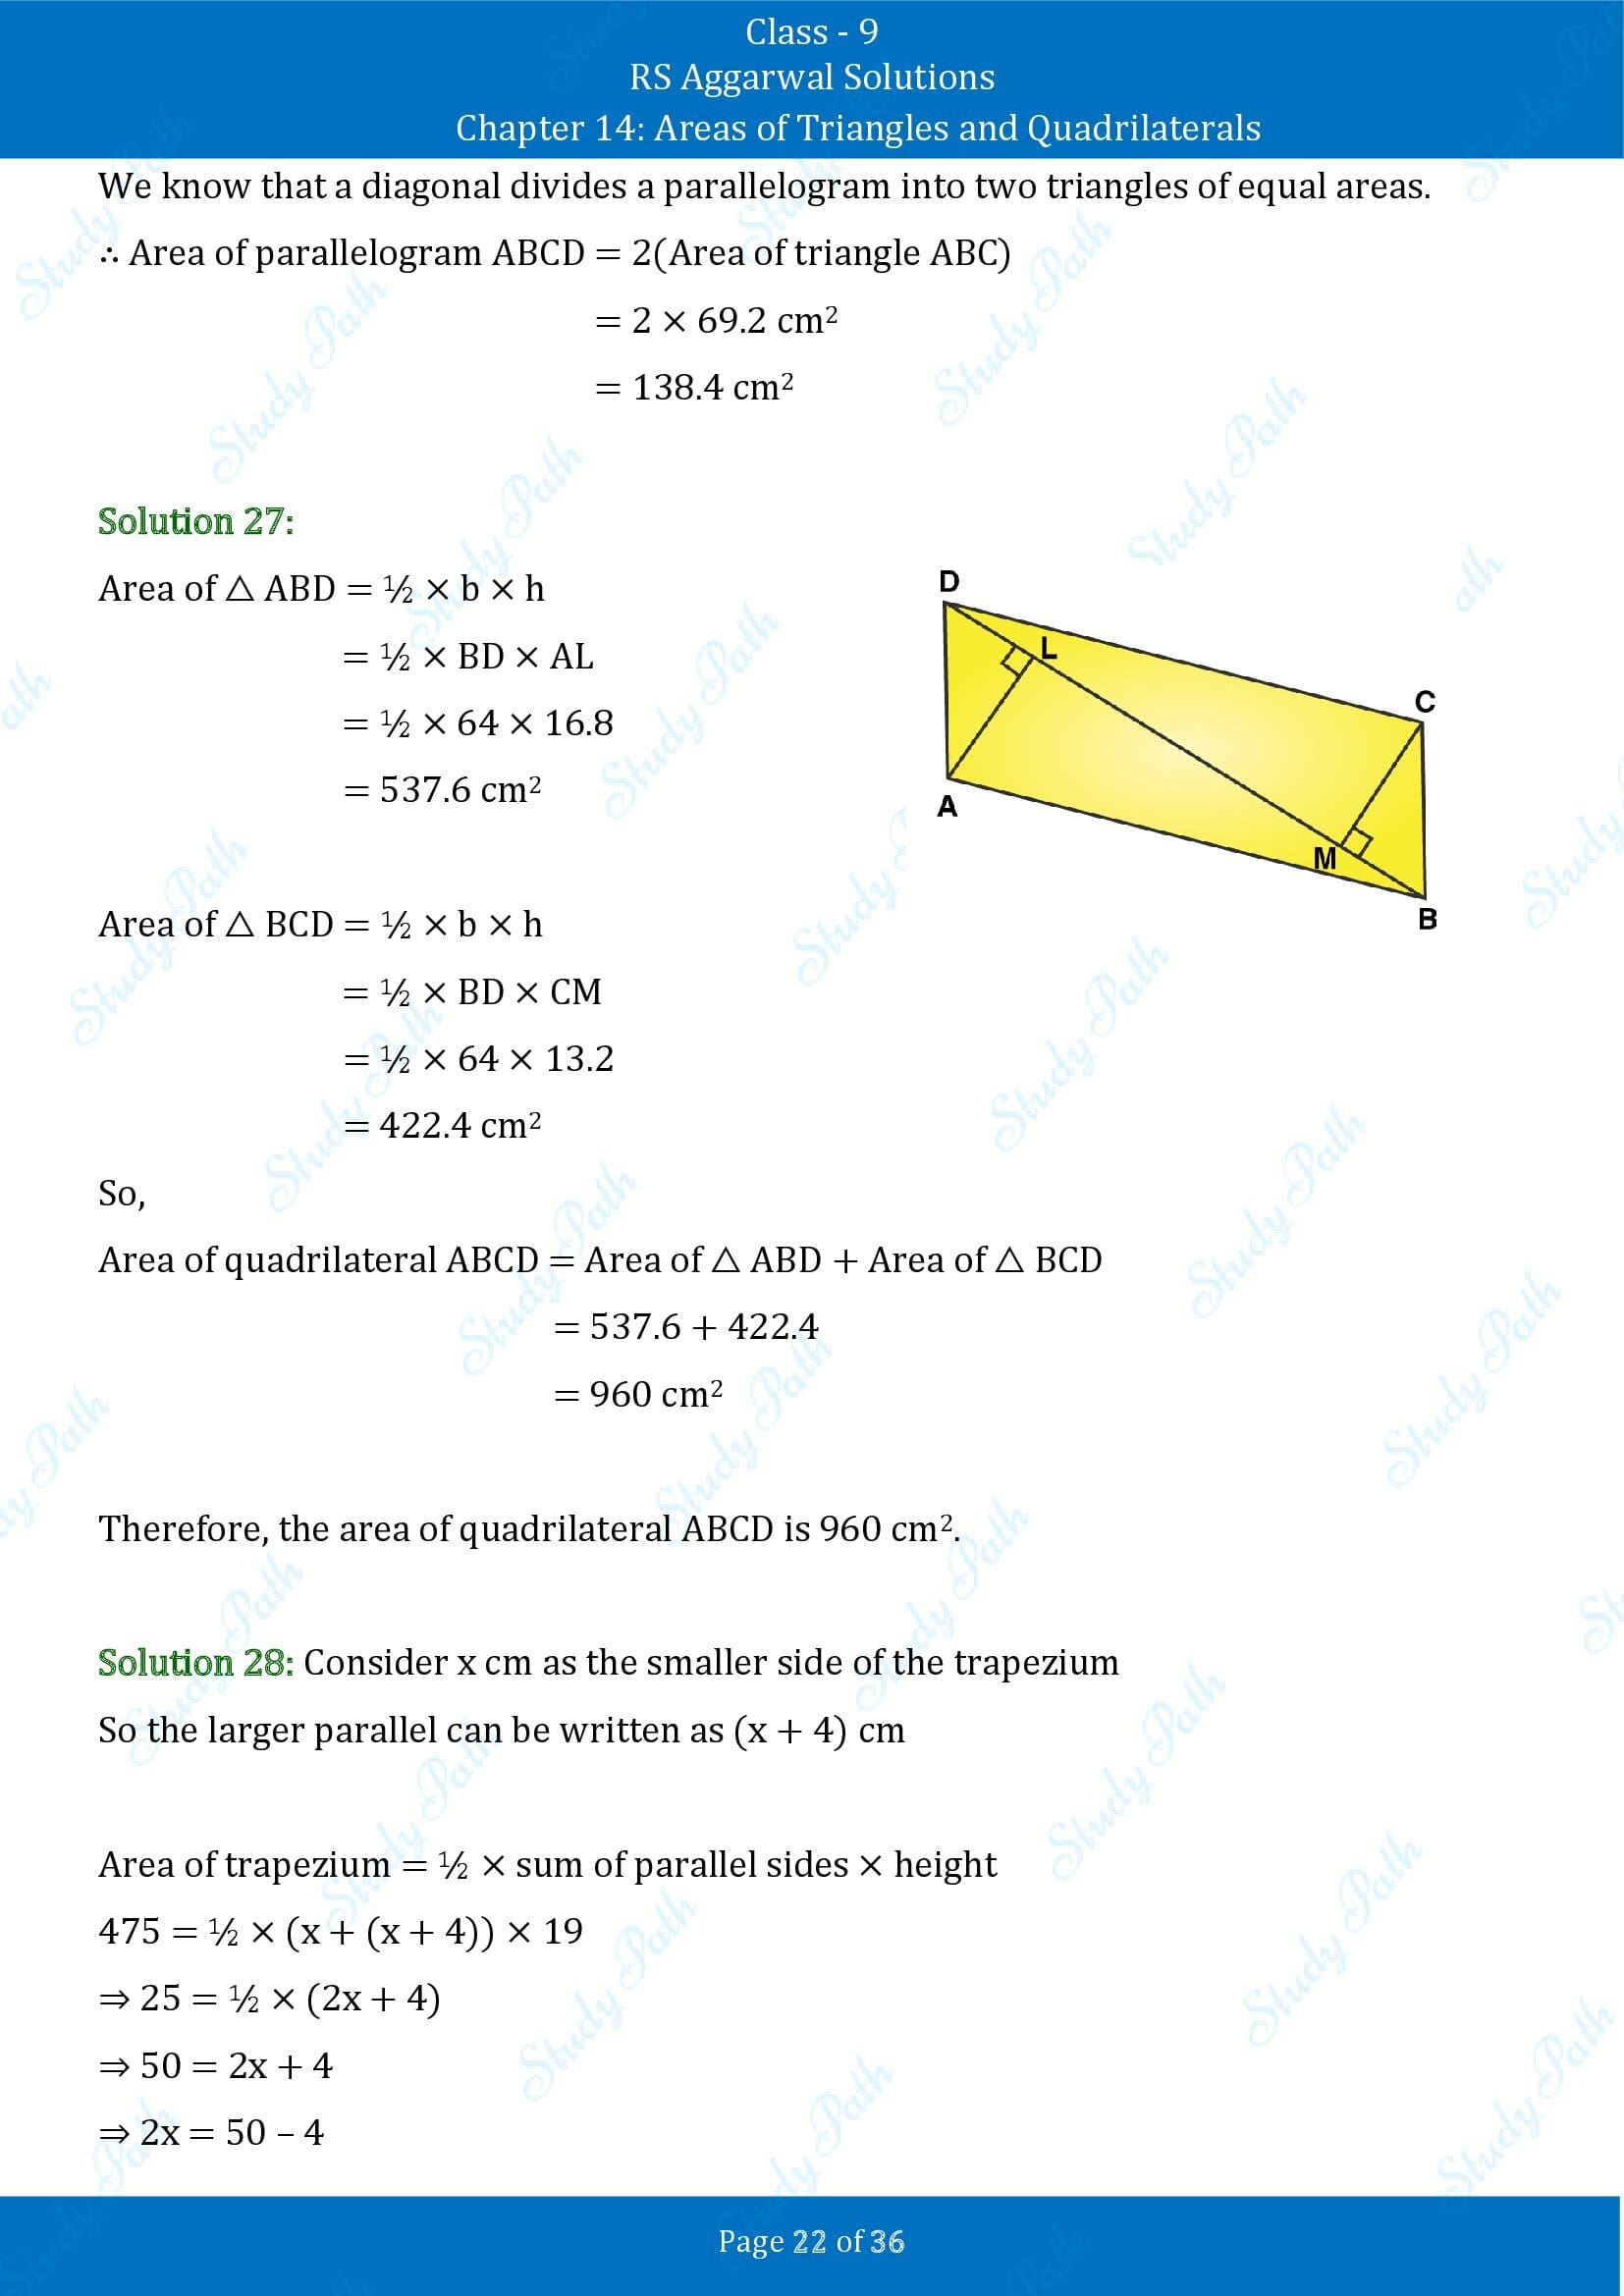 RS Aggarwal Solutions Class 9 Chapter 14 Areas of Triangles and Quadrilaterals Exercise 14 00022